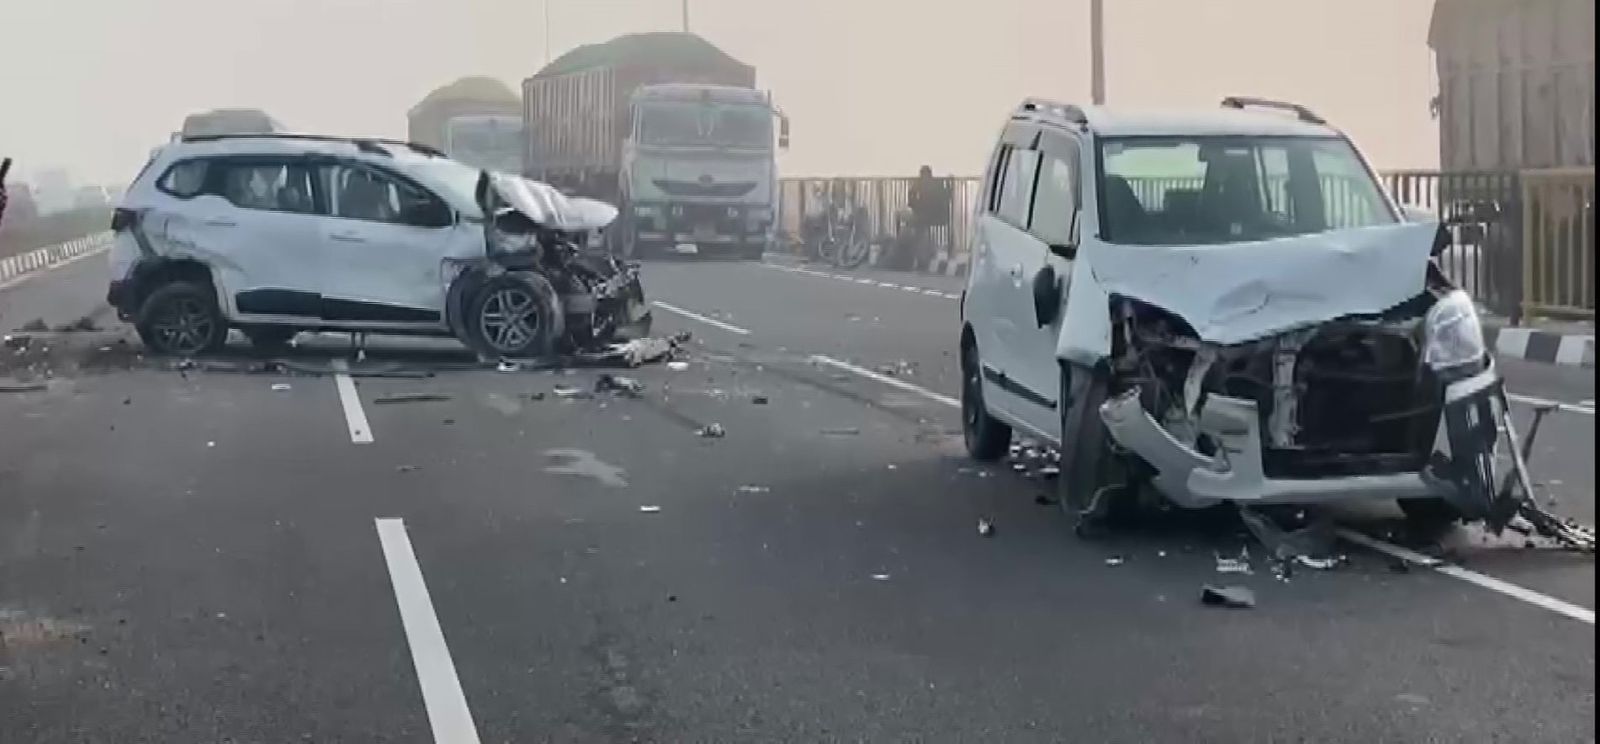 15-20 Vehicles Collided on Delhi-Lucknow Highway